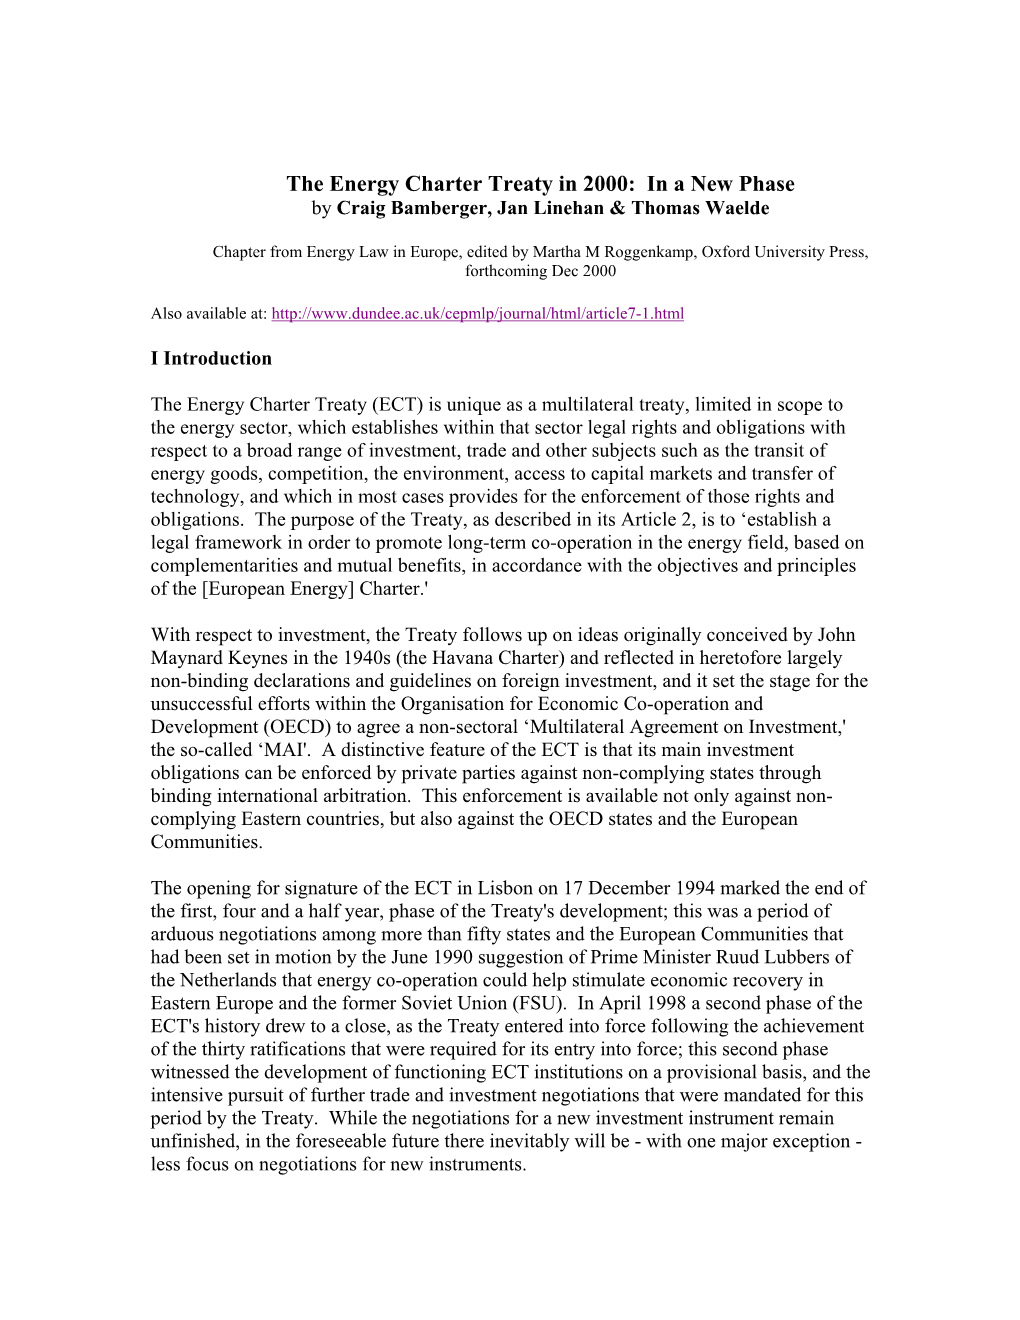 The Energy Charter Treaty in 2000: in a New Phase by Craig Bamberger, Jan Linehan & Thomas Waelde